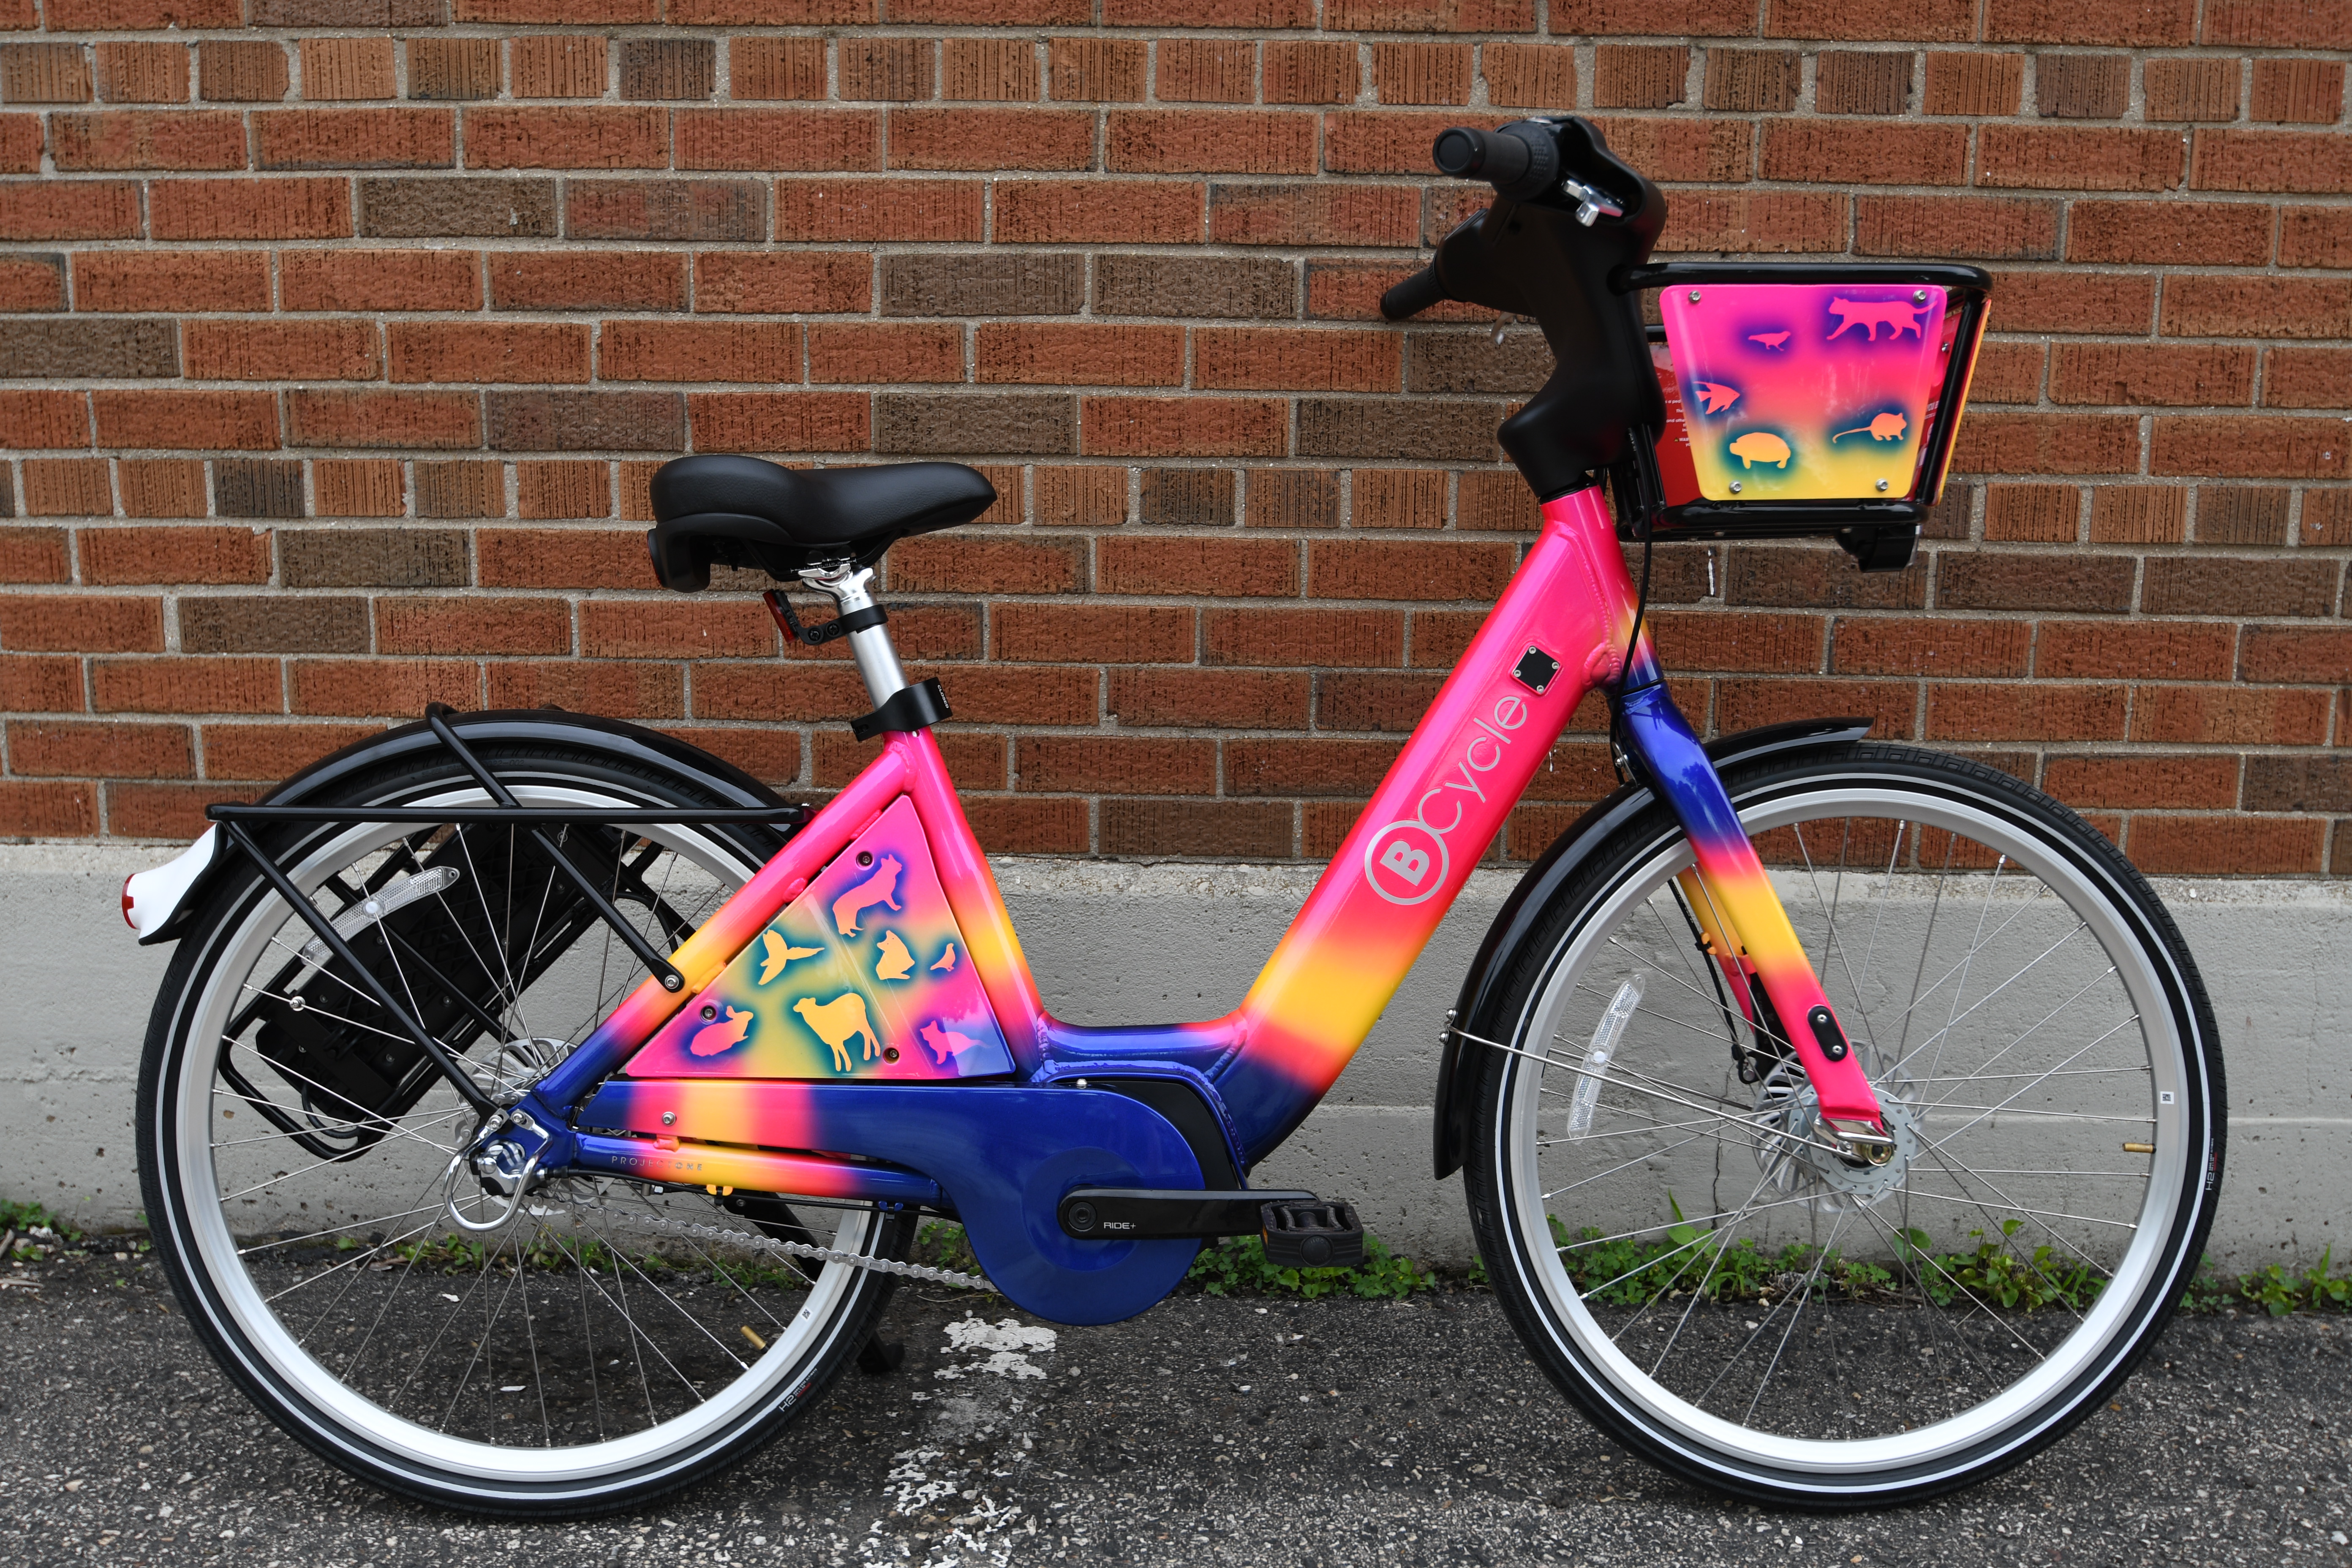 Project One Art Bike for Humane Society